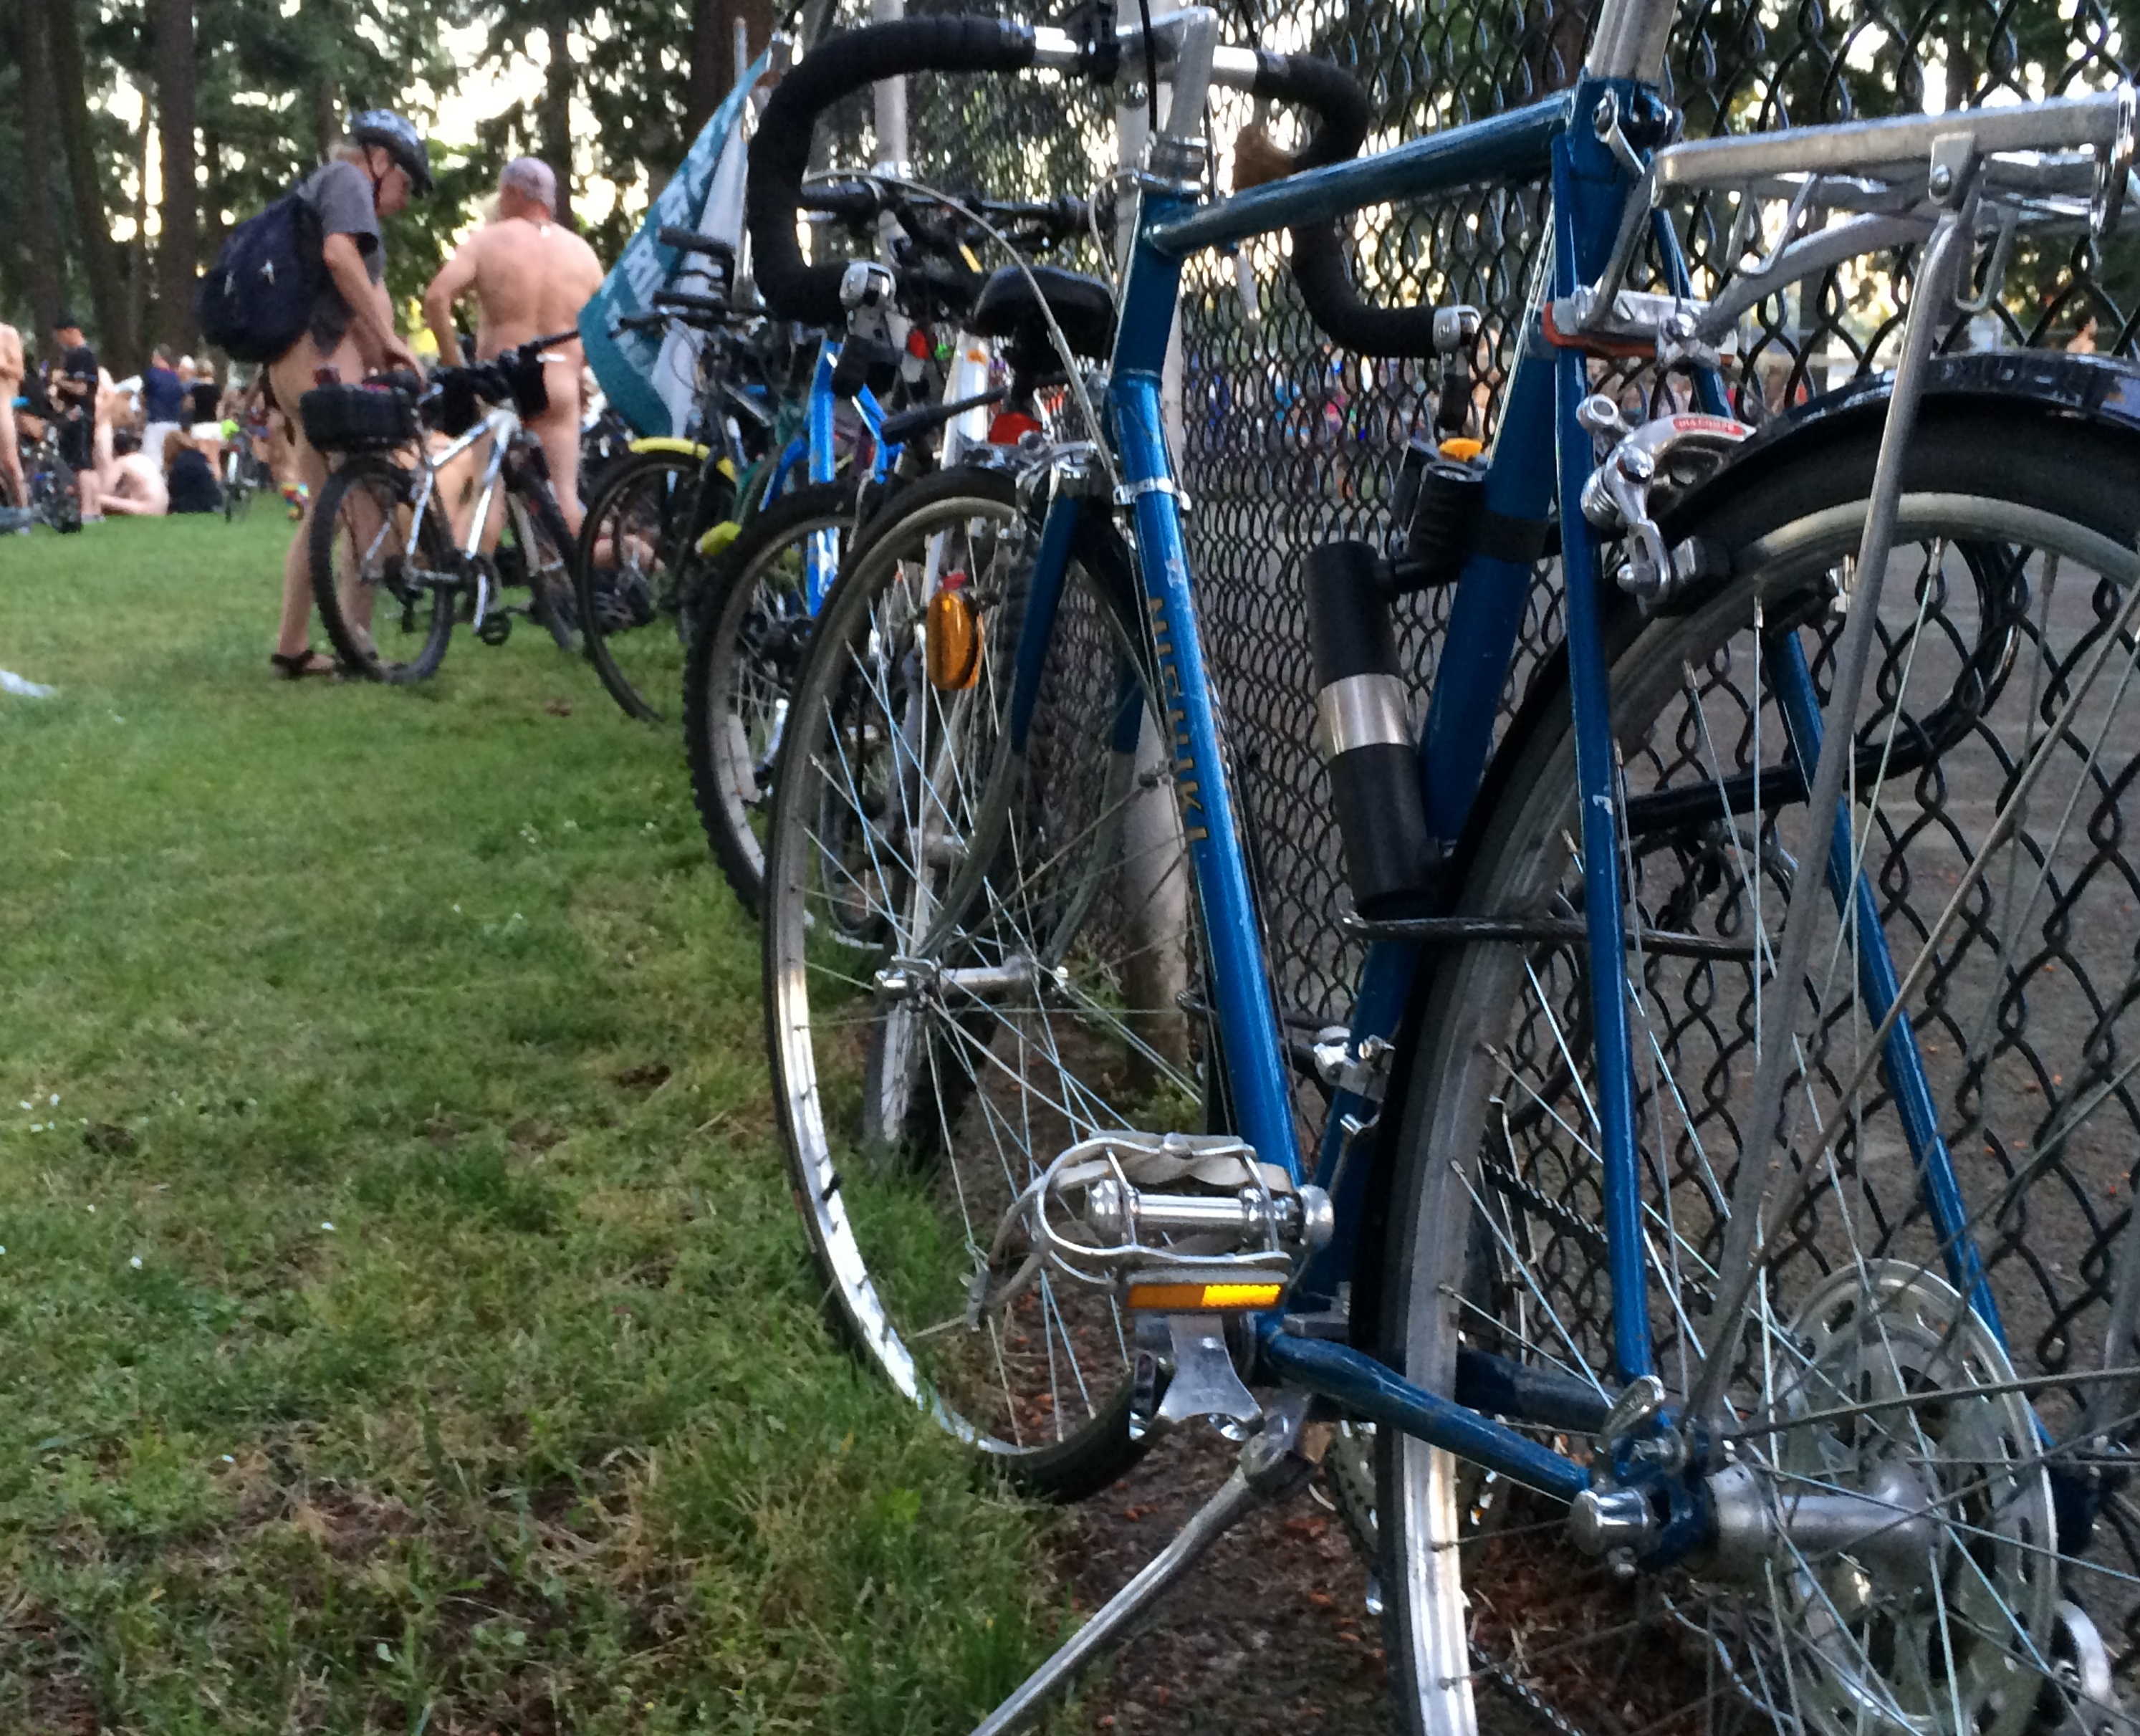 Portlands World Naked Bike Ride Is On Saturday 